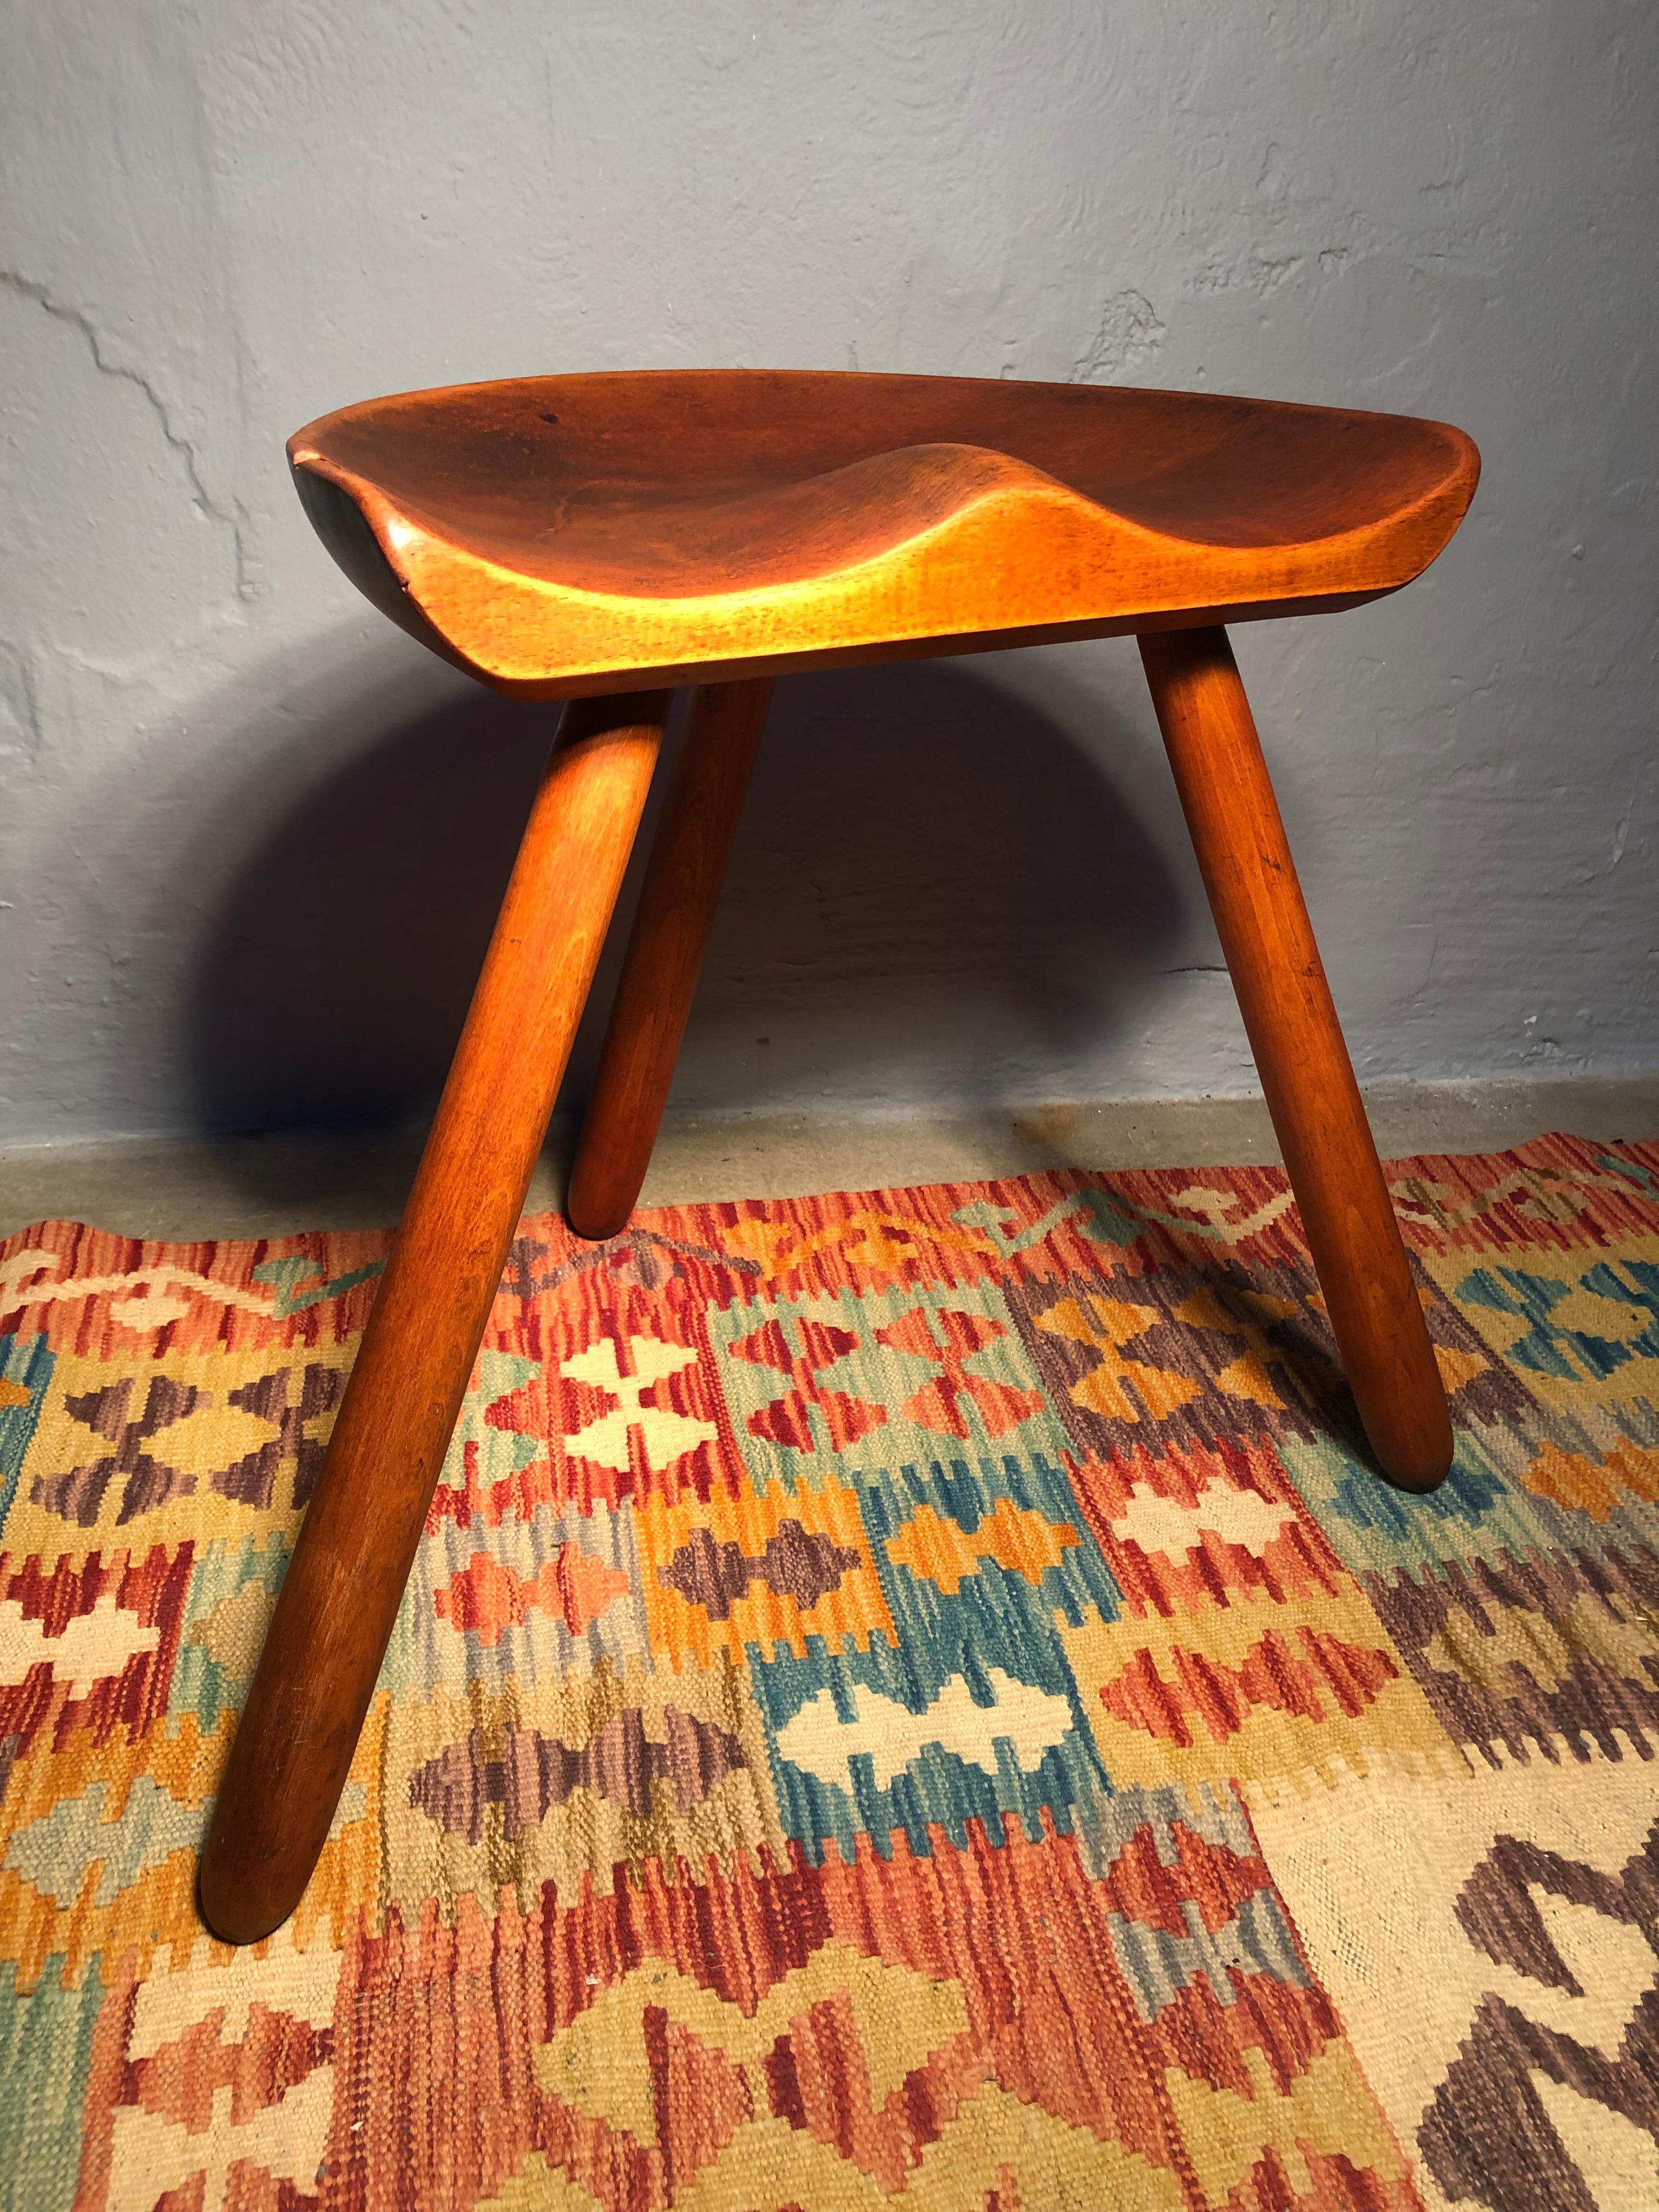 A mid Century milking Stool in beech wood. 
With a sculptural and simplistic Scandinavian design and with a carved seat and turned legs. 
The stool has been sanded and waxed. 
One small repair to the edge of the seat visible in the pictures. 
With